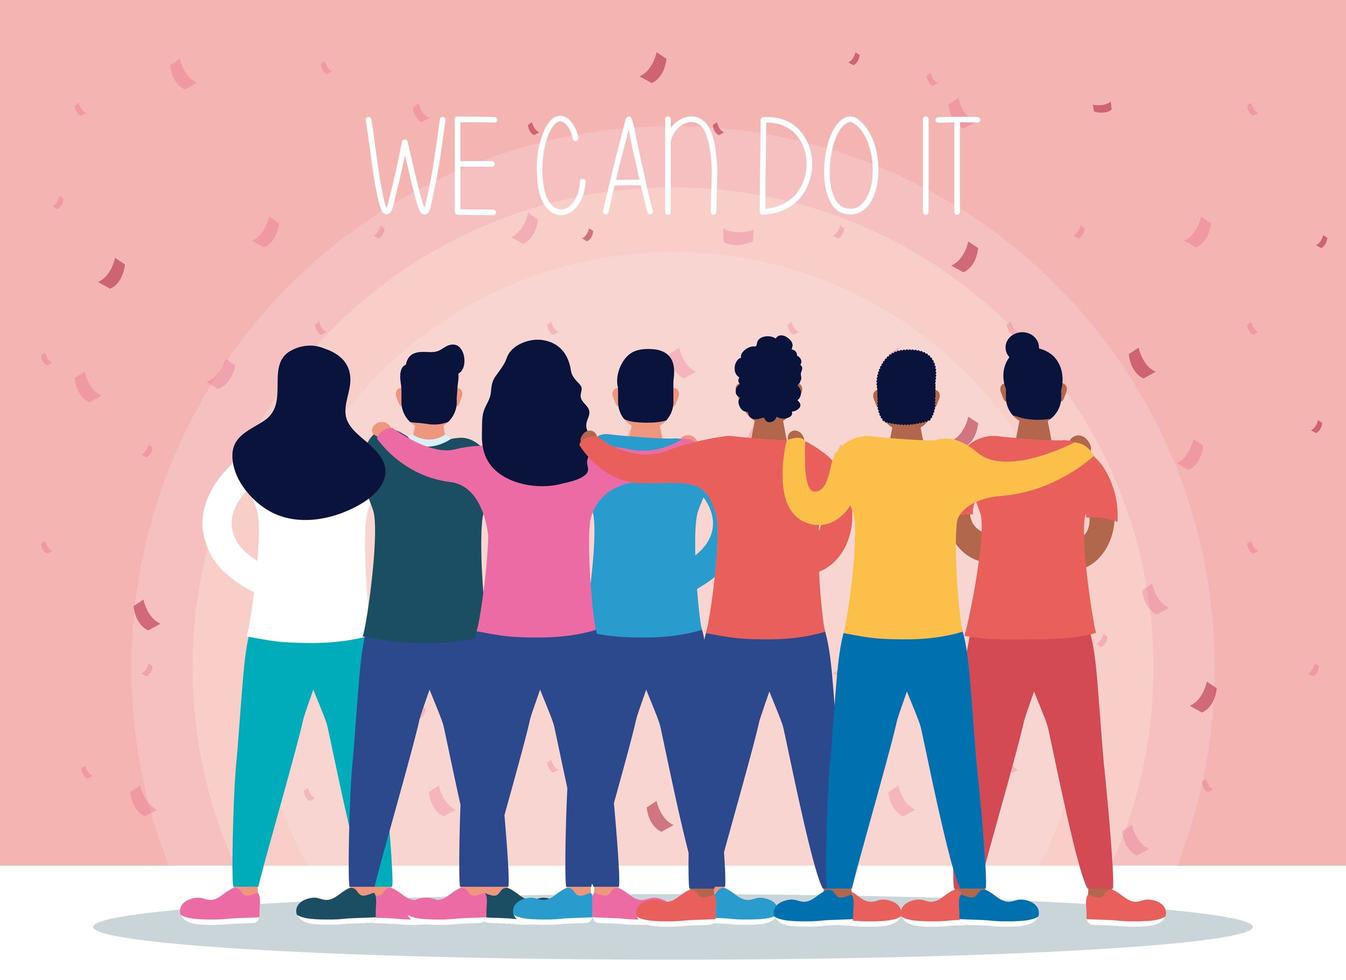 We can do it message with people together vector